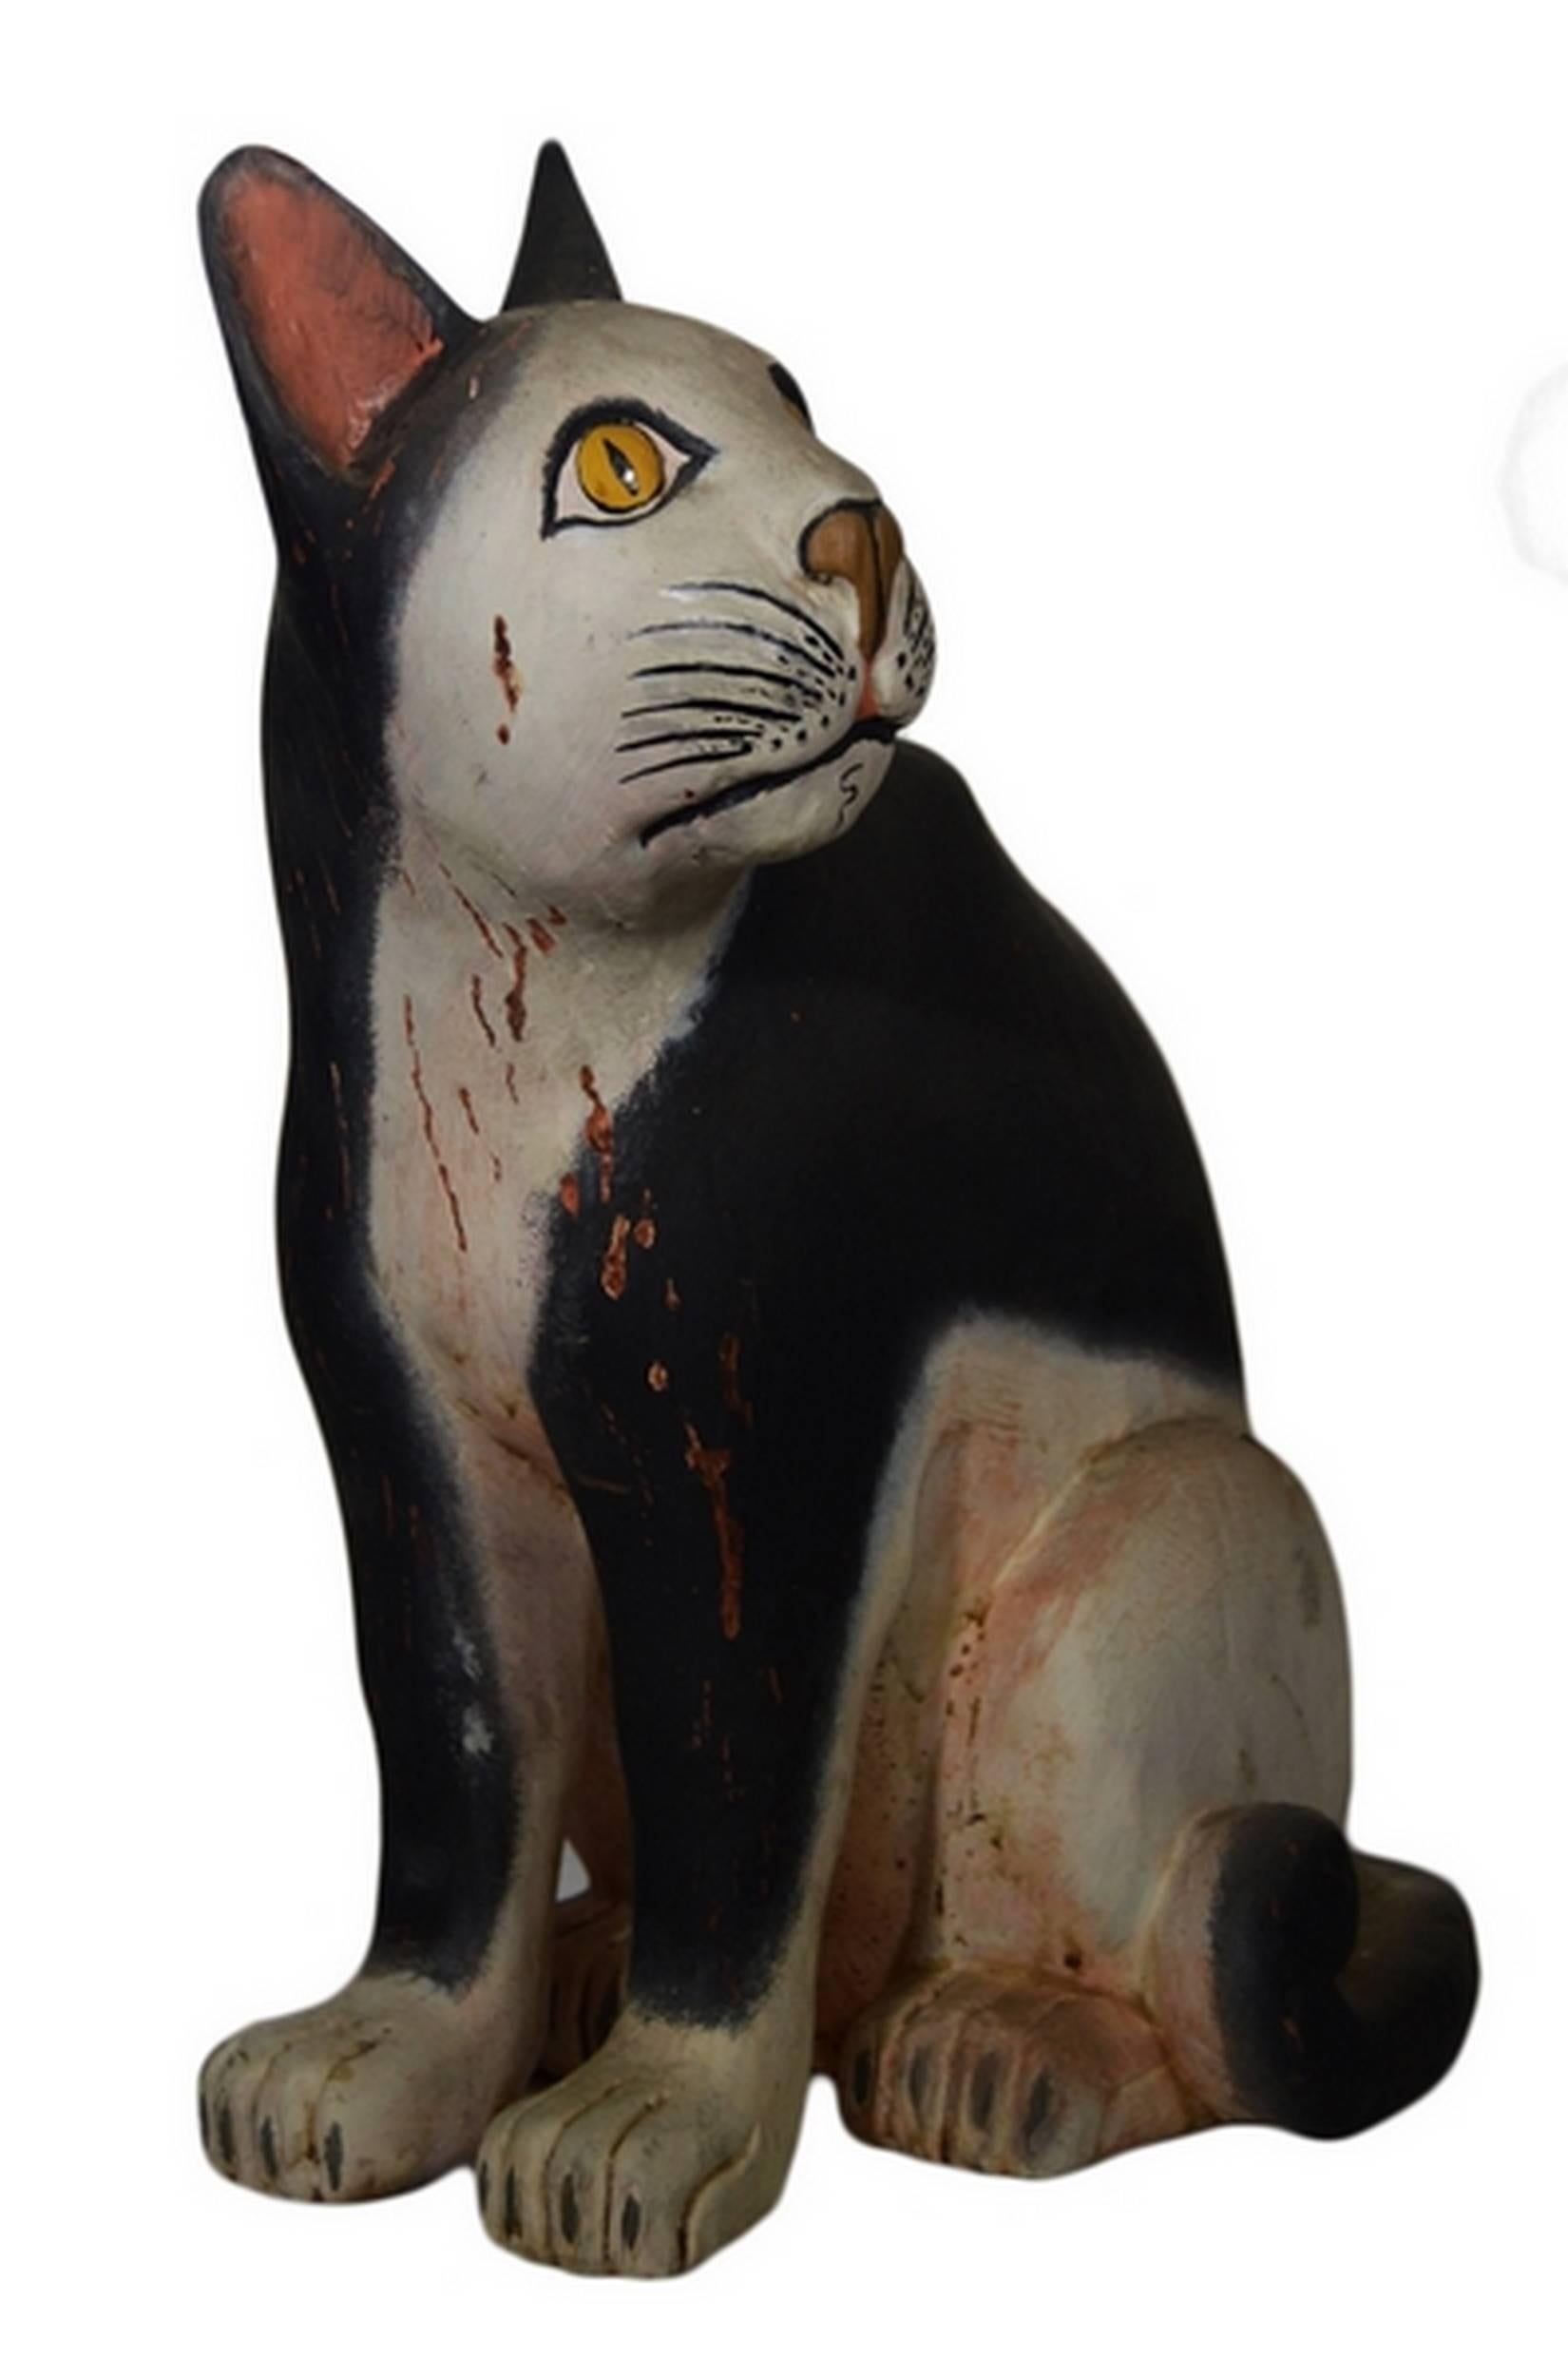 Indonesian Hand-Carved Wooden Cat Sculpture